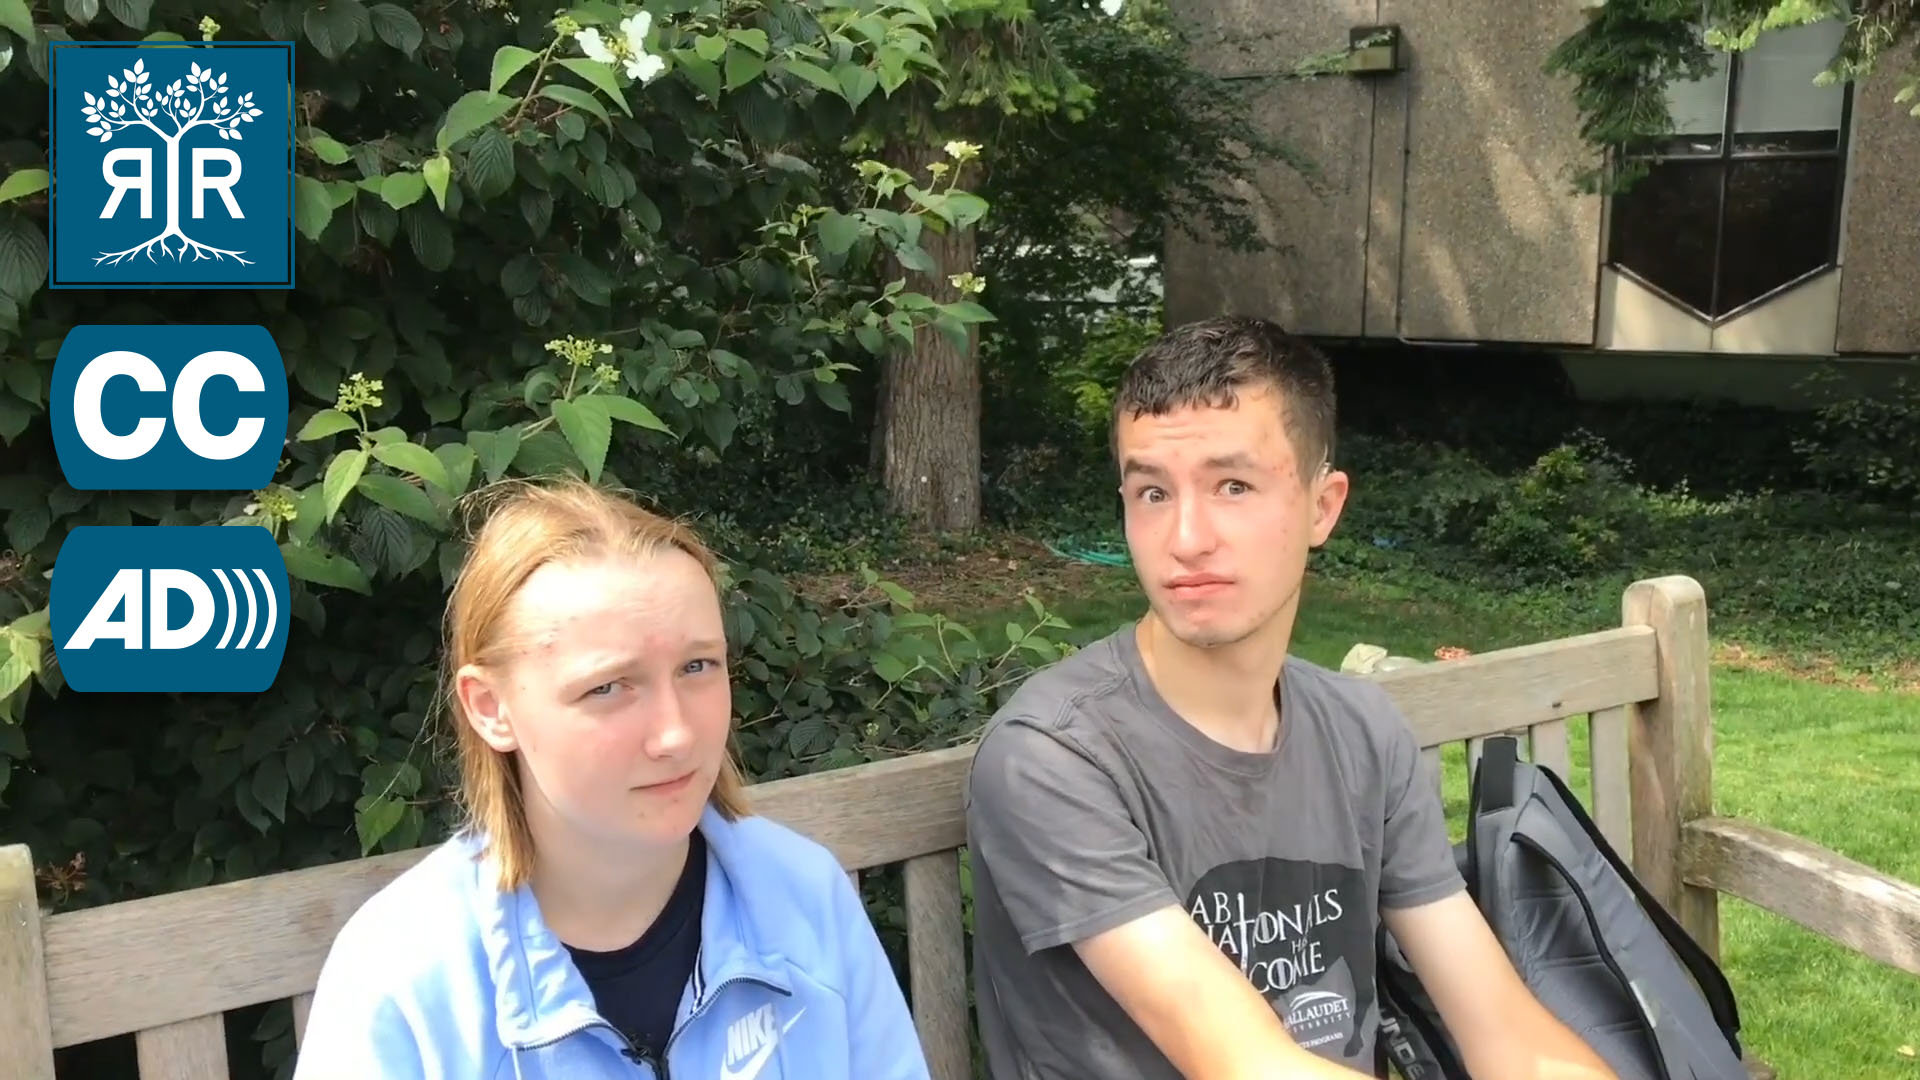 Two students on a bench grimace at the camera.